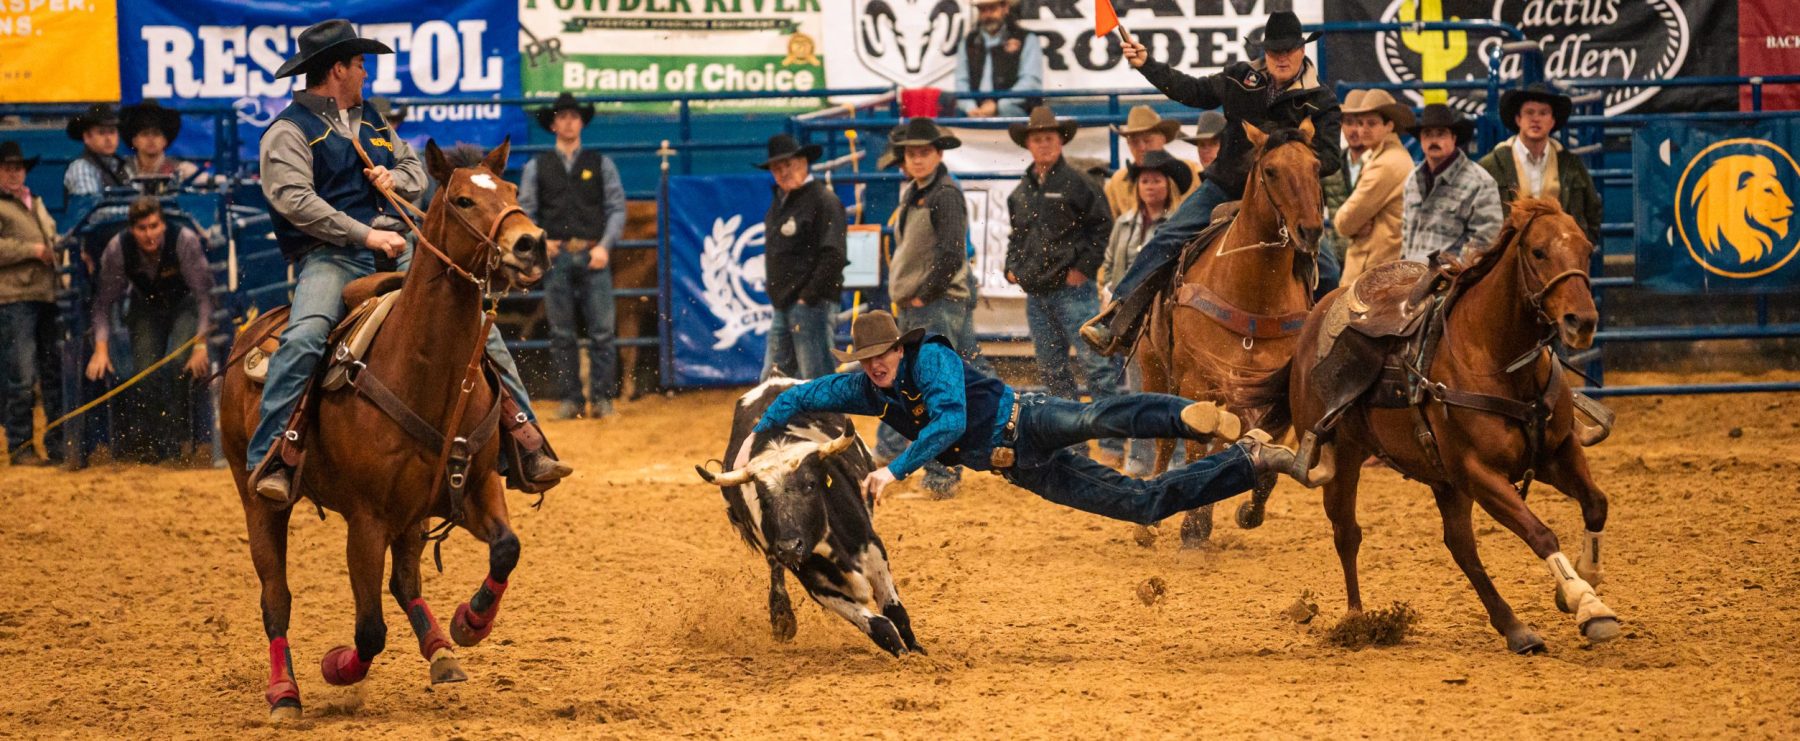 Rodeo athletes in a team roping competition. One horse rider looks on while another leaps off of their horse to tackle a calf.